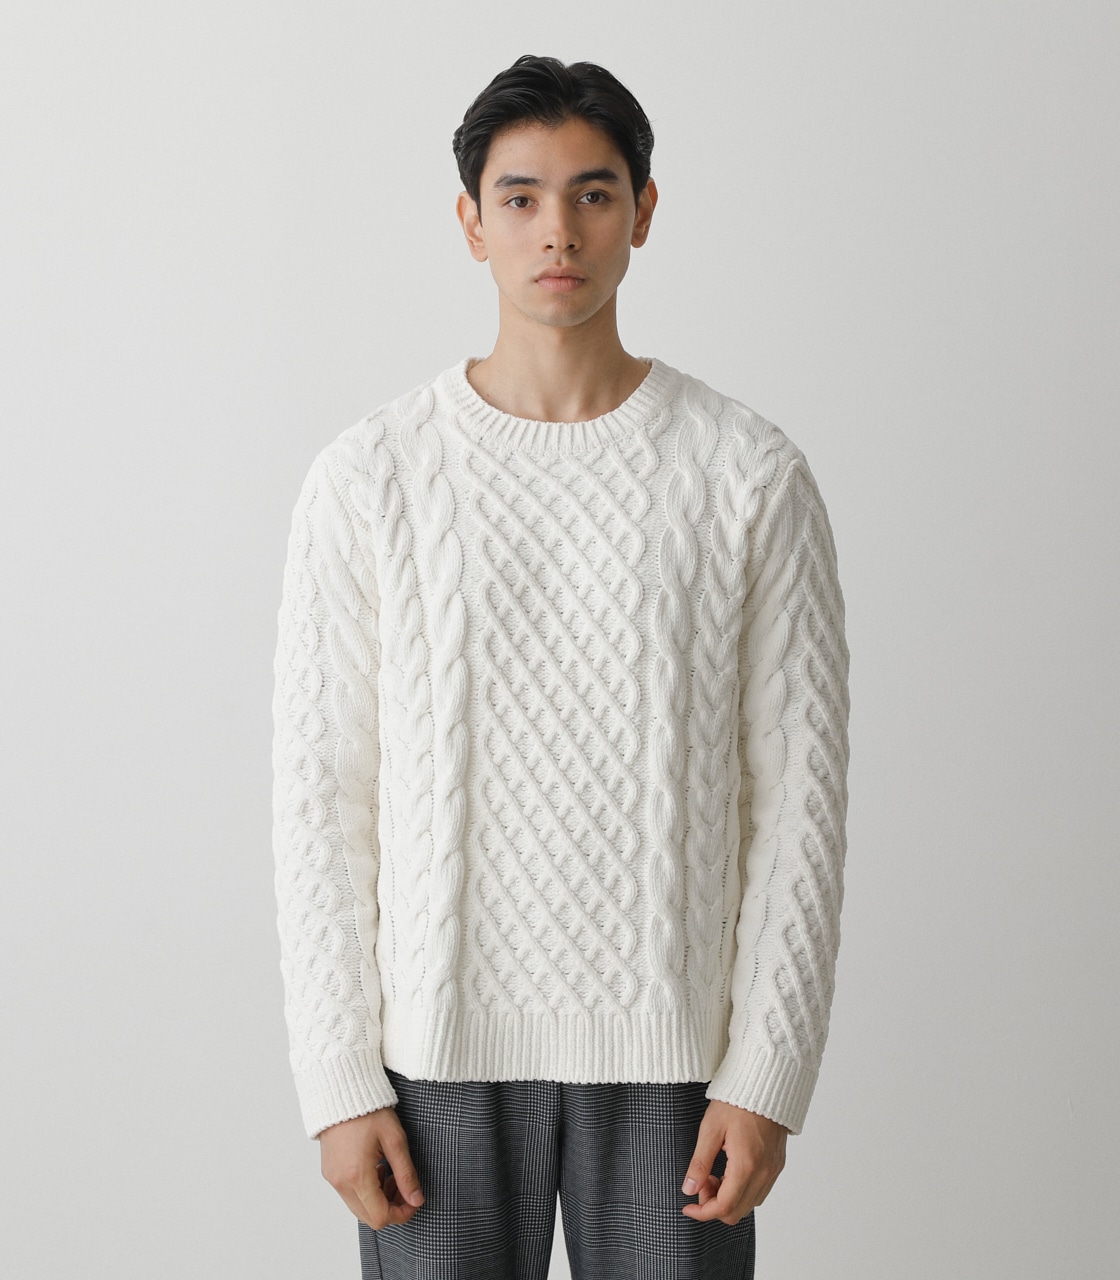 CHENILLE CABLE PULLOVER/シェニールケーブルプルオーバー 詳細画像 WHT 5